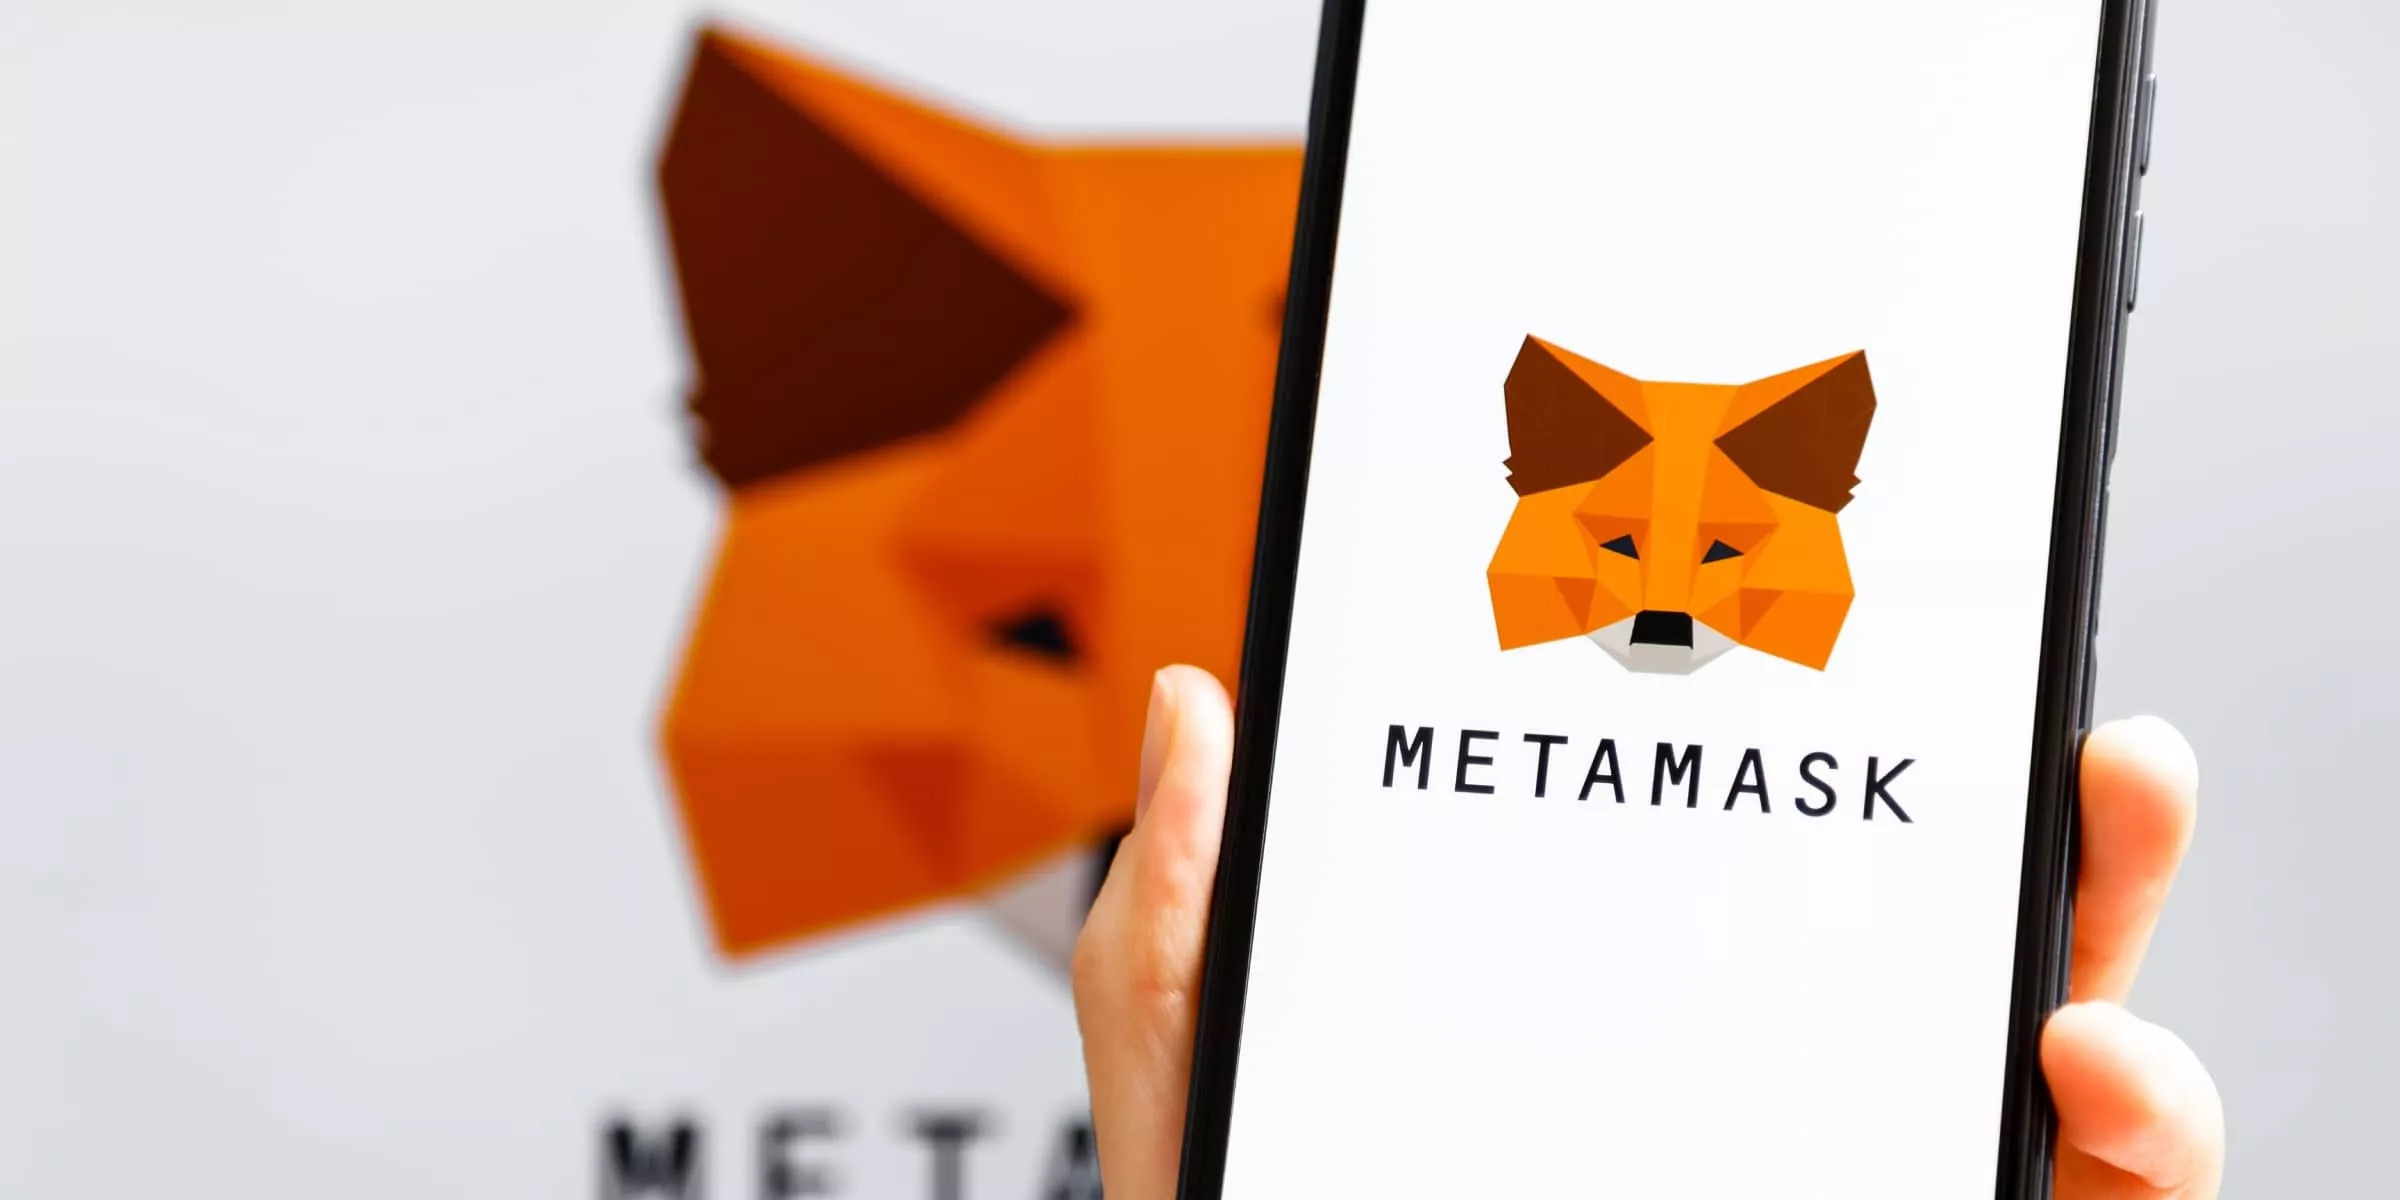 How to change a MetaMask password